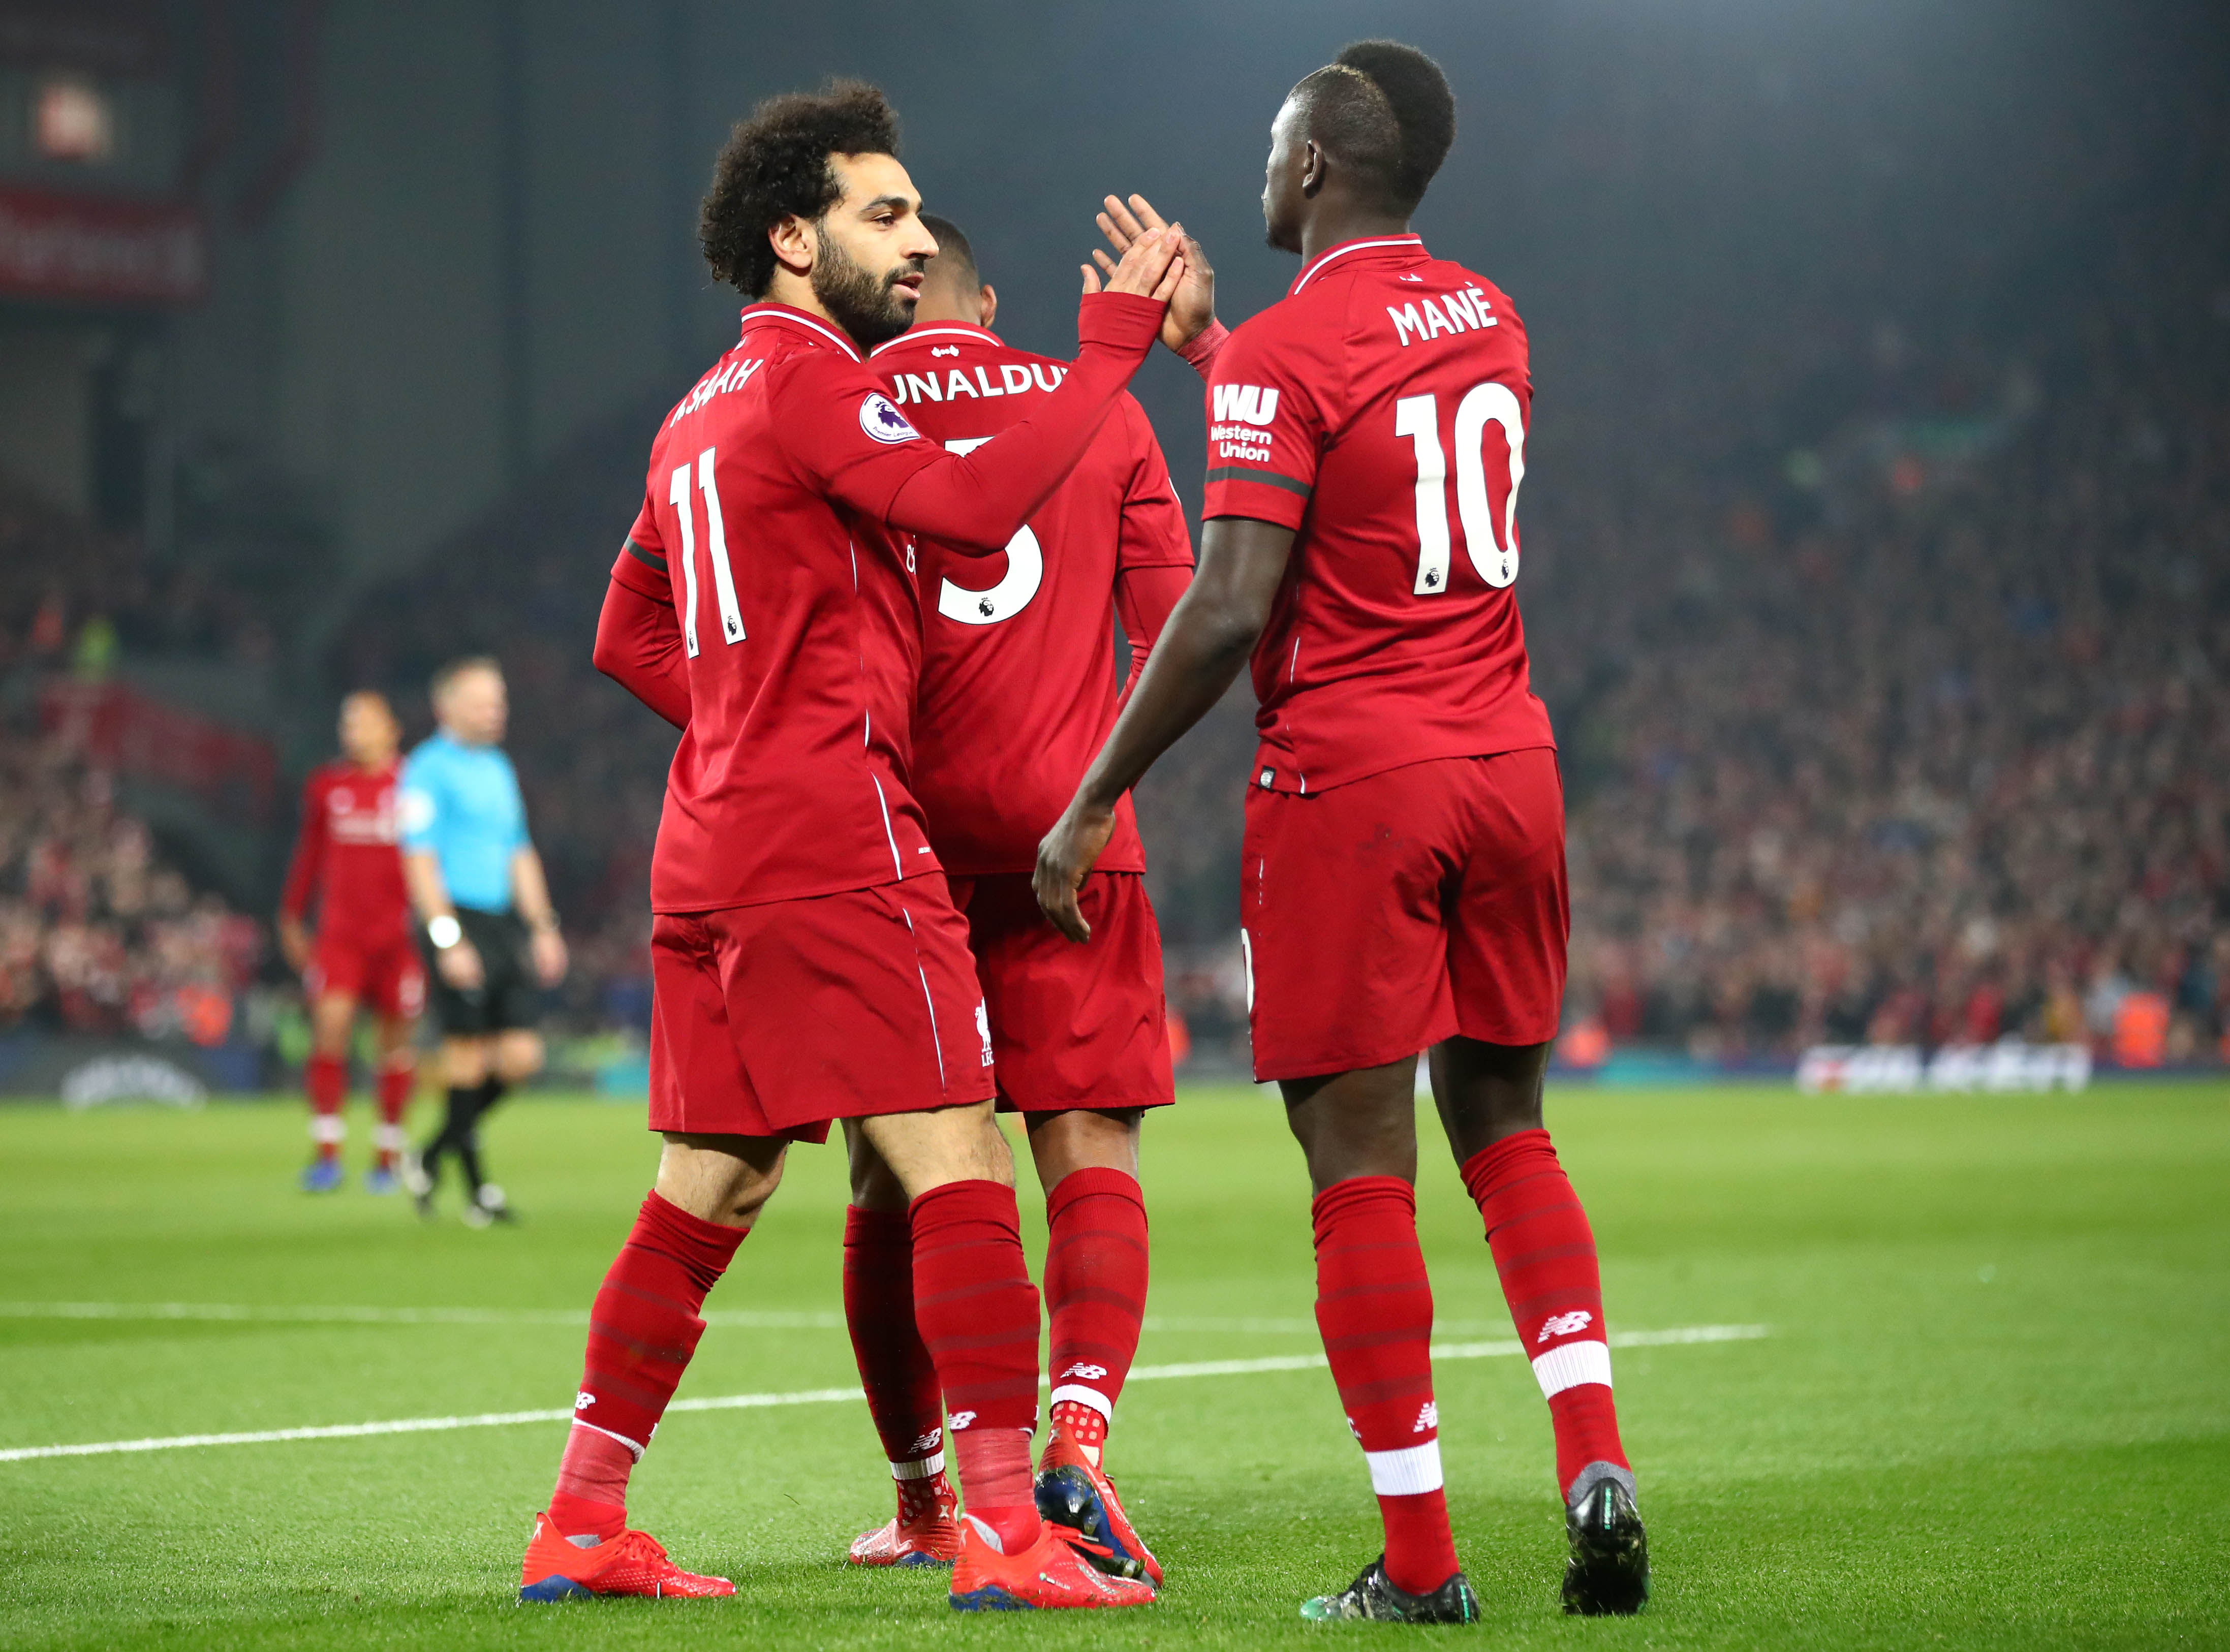 LIVERPOOL, ENGLAND - FEBRUARY 27: Sadio Mane of Liverpool celebrates after scoring his team's first goal with Mohamed Salah of Liverpool during the Premier League match between Liverpool FC and Watford FC at Anfield on February 27, 2019 in Liverpool, United Kingdom. (Photo by Clive Brunskill/Getty Images)